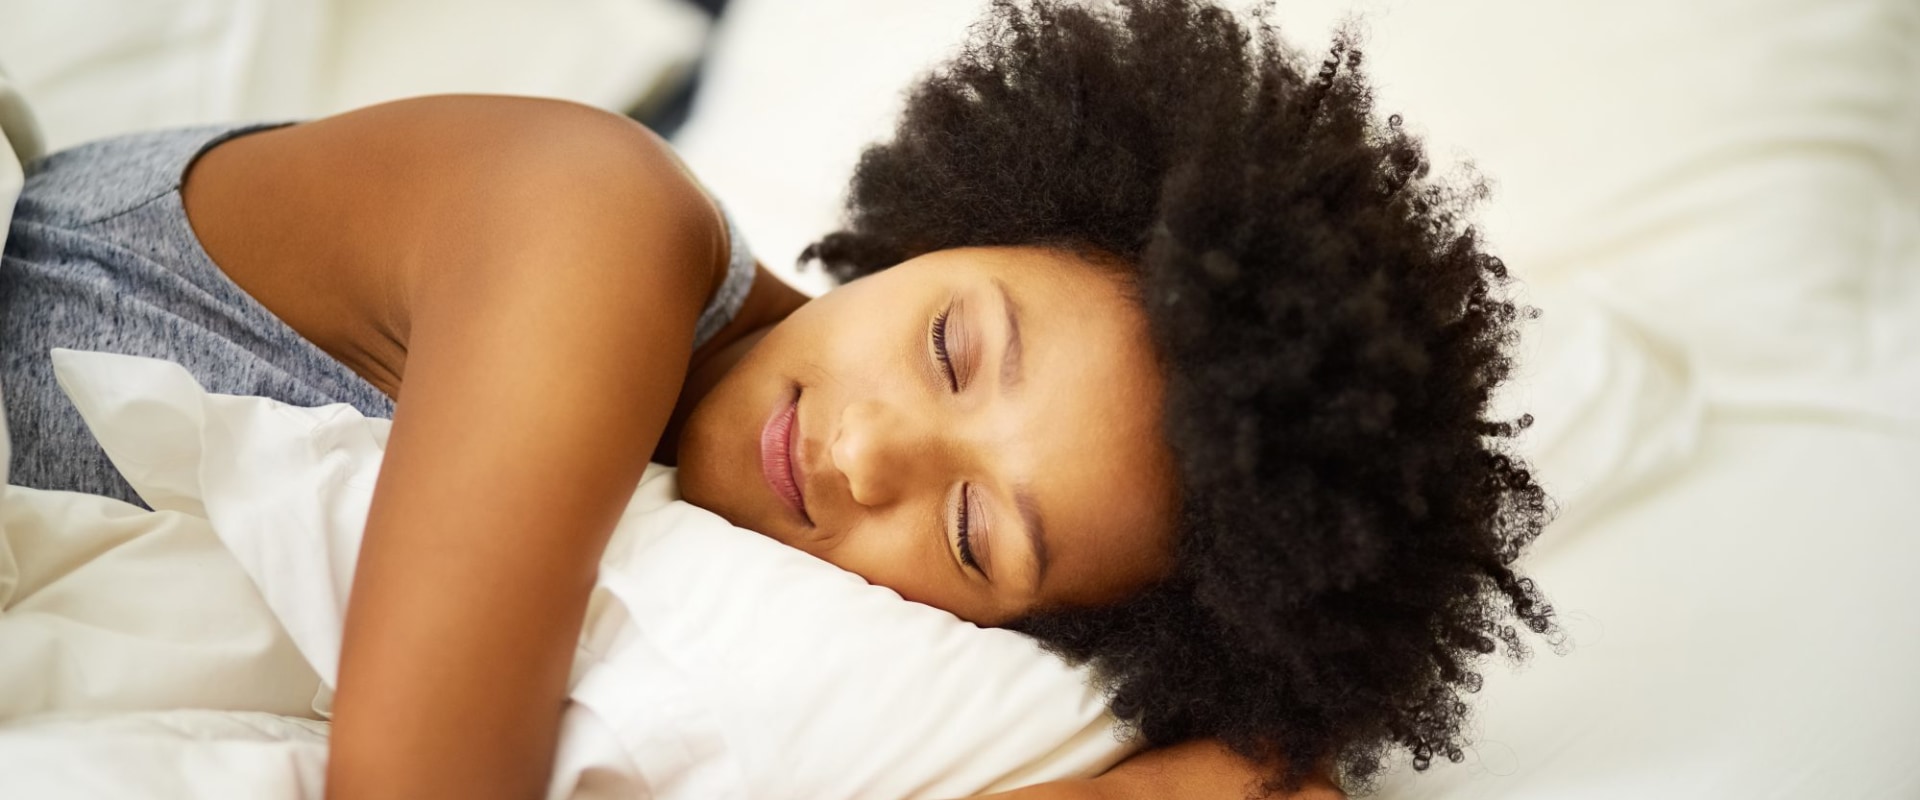 What Does It Mean When You Sleep With Your Eyes Open Spiritually?